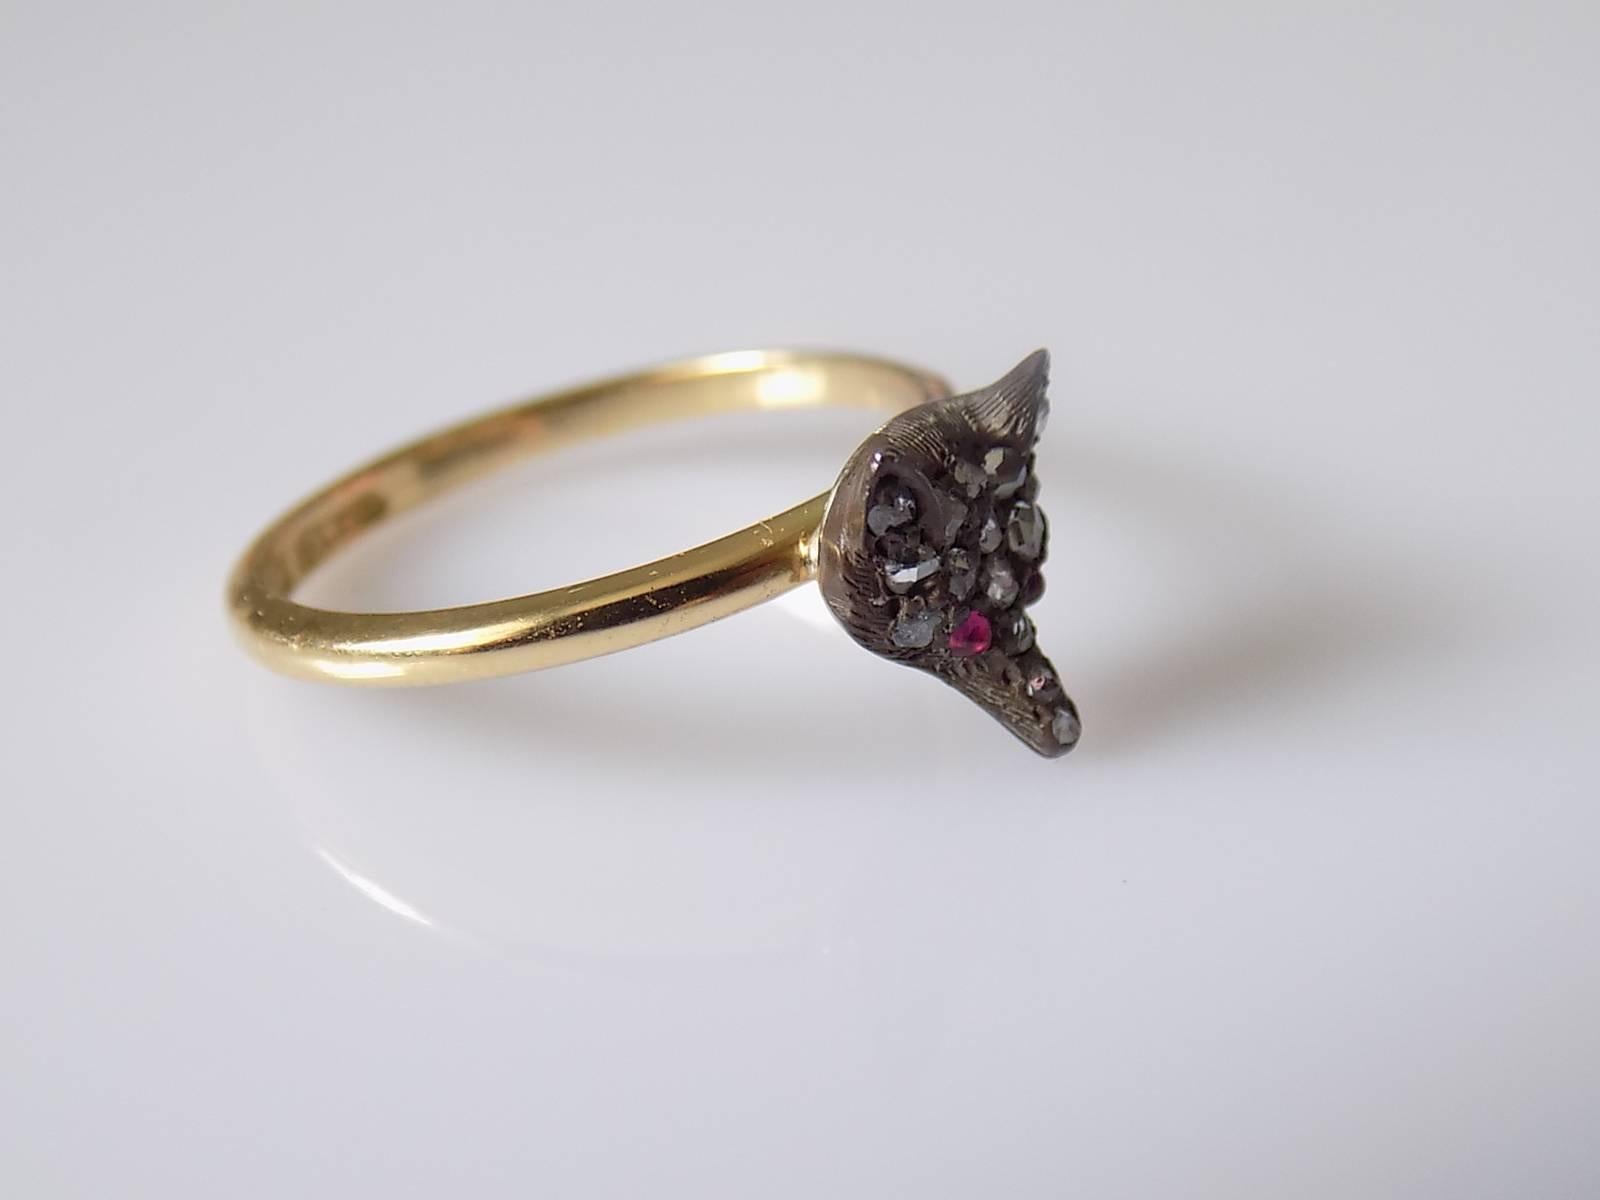 A Cute Victorian Silver, Rose cut Diamonds and Ruby Fox head stick pin conversion ring on 18 Carat Gold shank. 

Size M 1/2 UK, 6.75 US.

Height of the face 9mm, Width 7mm.

Weight 2.5gr.

Shank fully hallmarked for 18 Carat Gold.